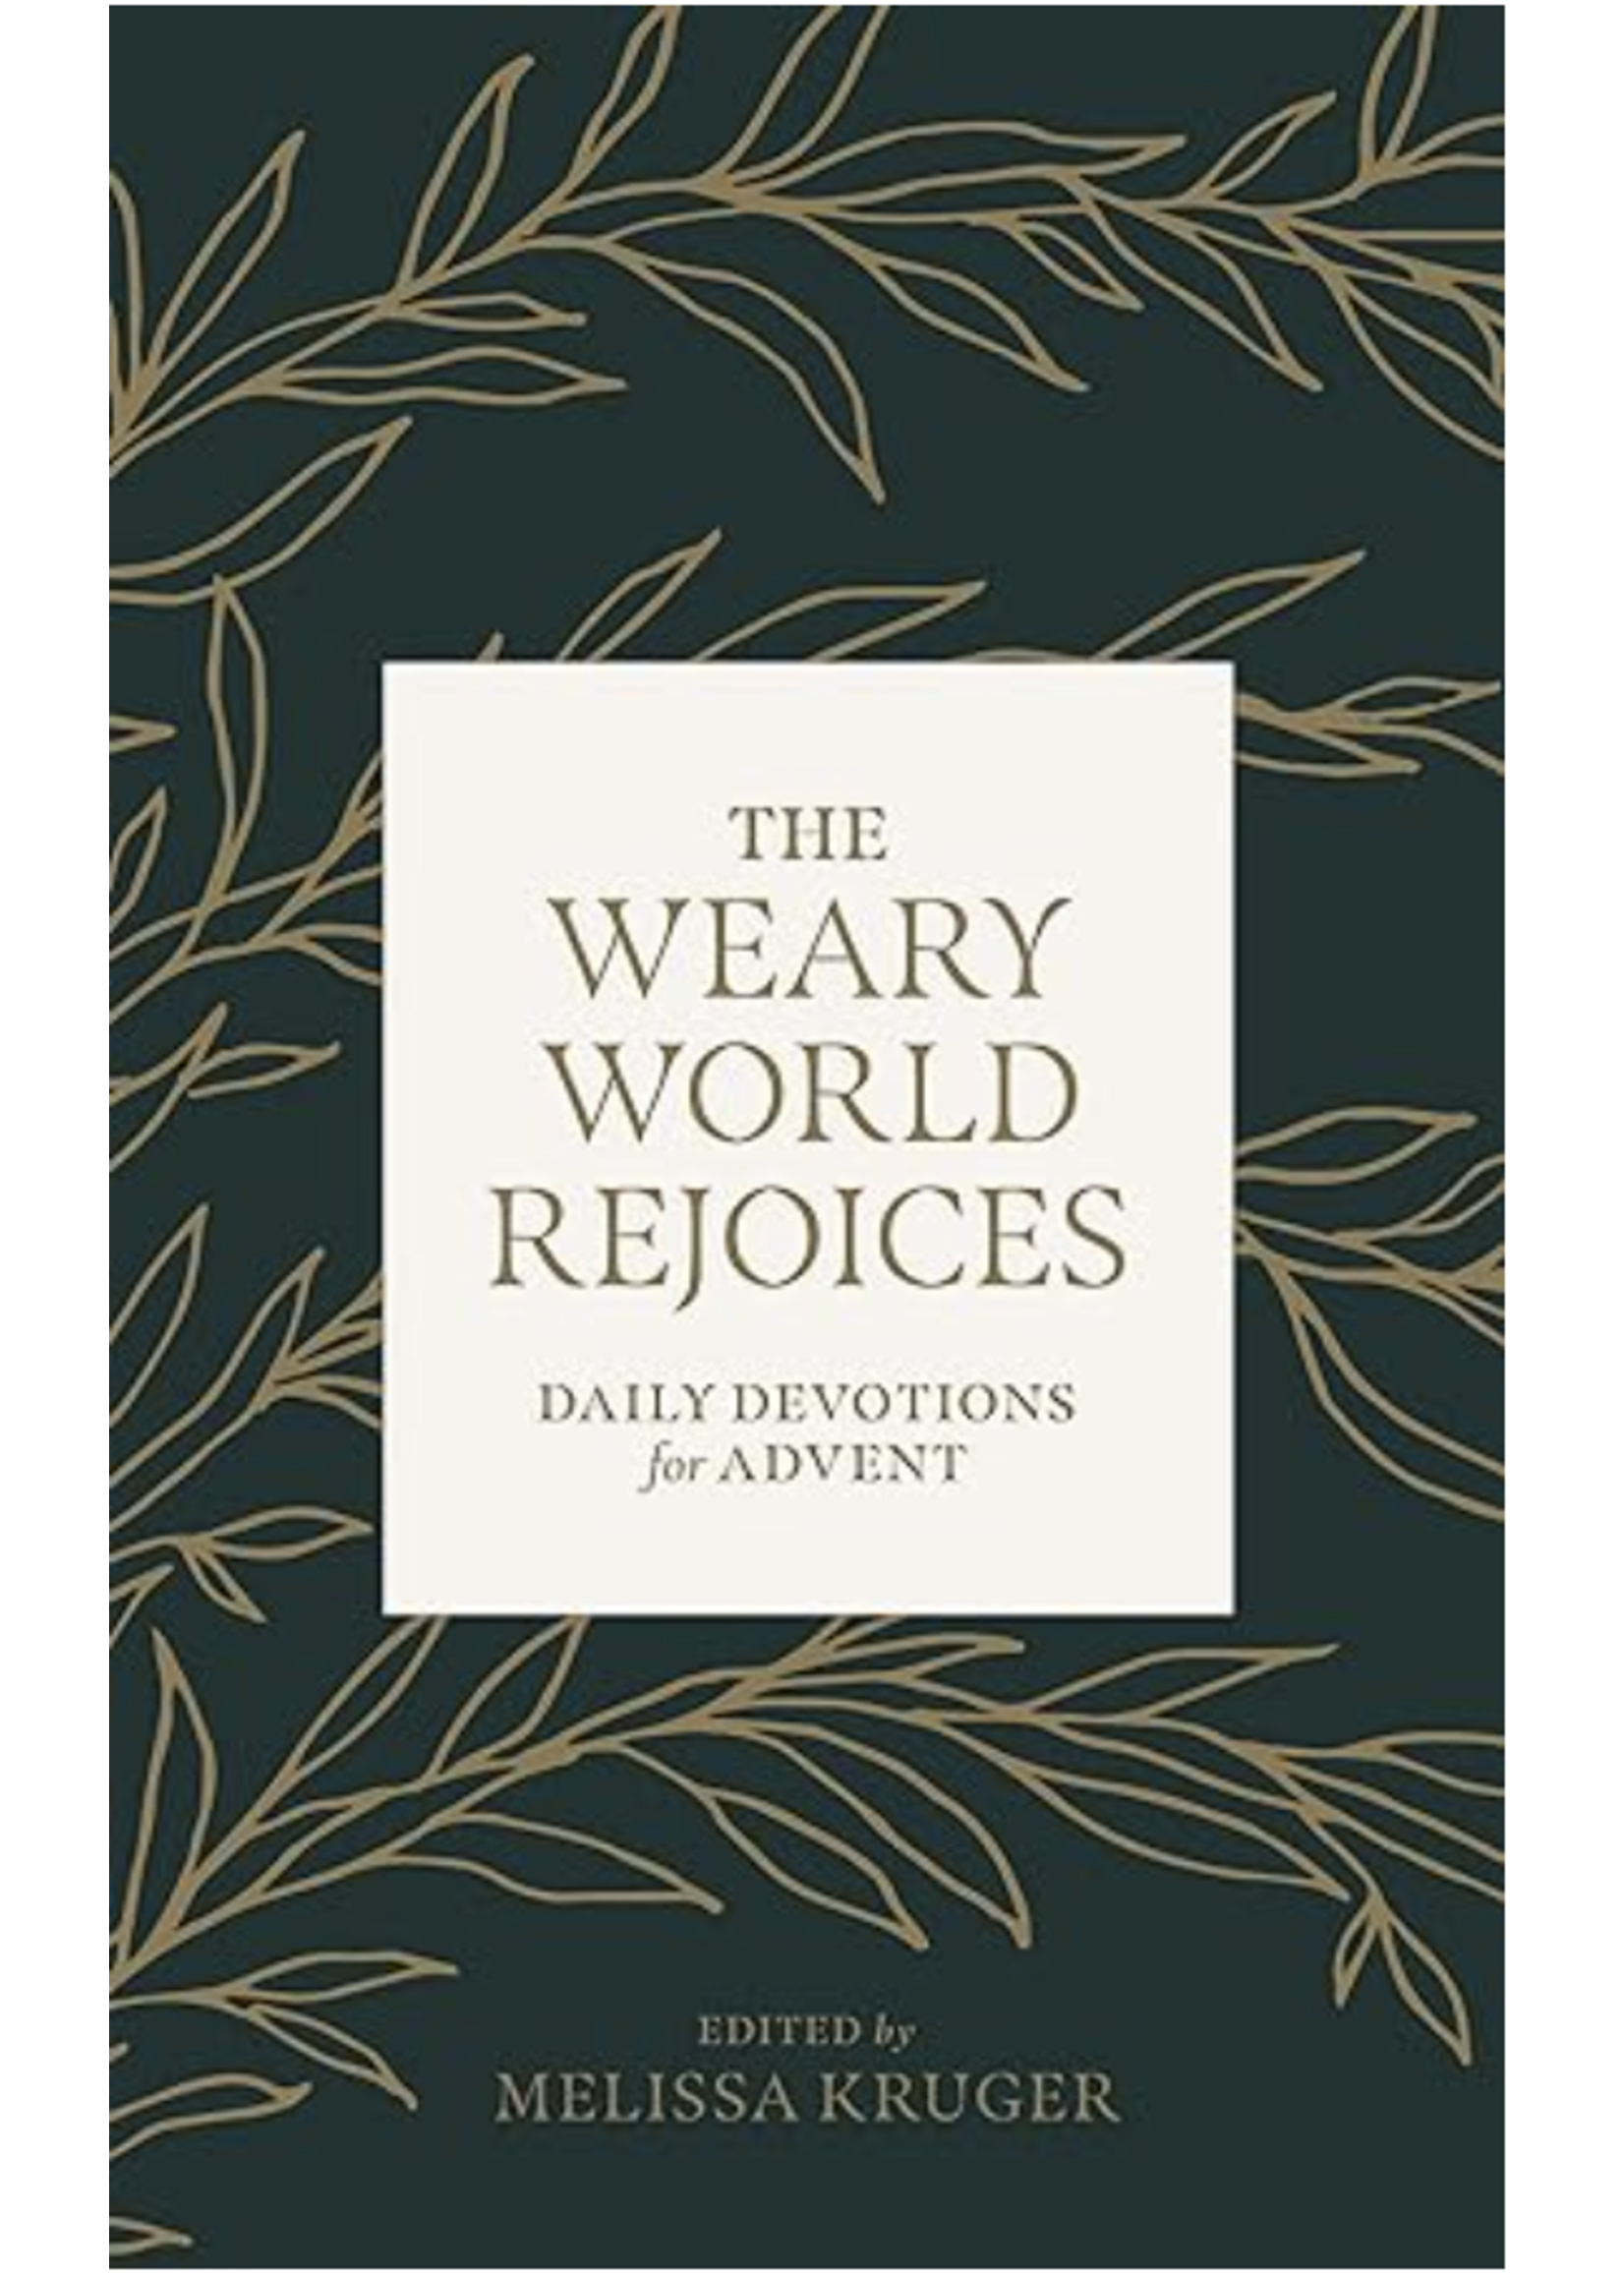 The Weary World Rejoices: Daily Devotions for Advent [Melissa Kruger]